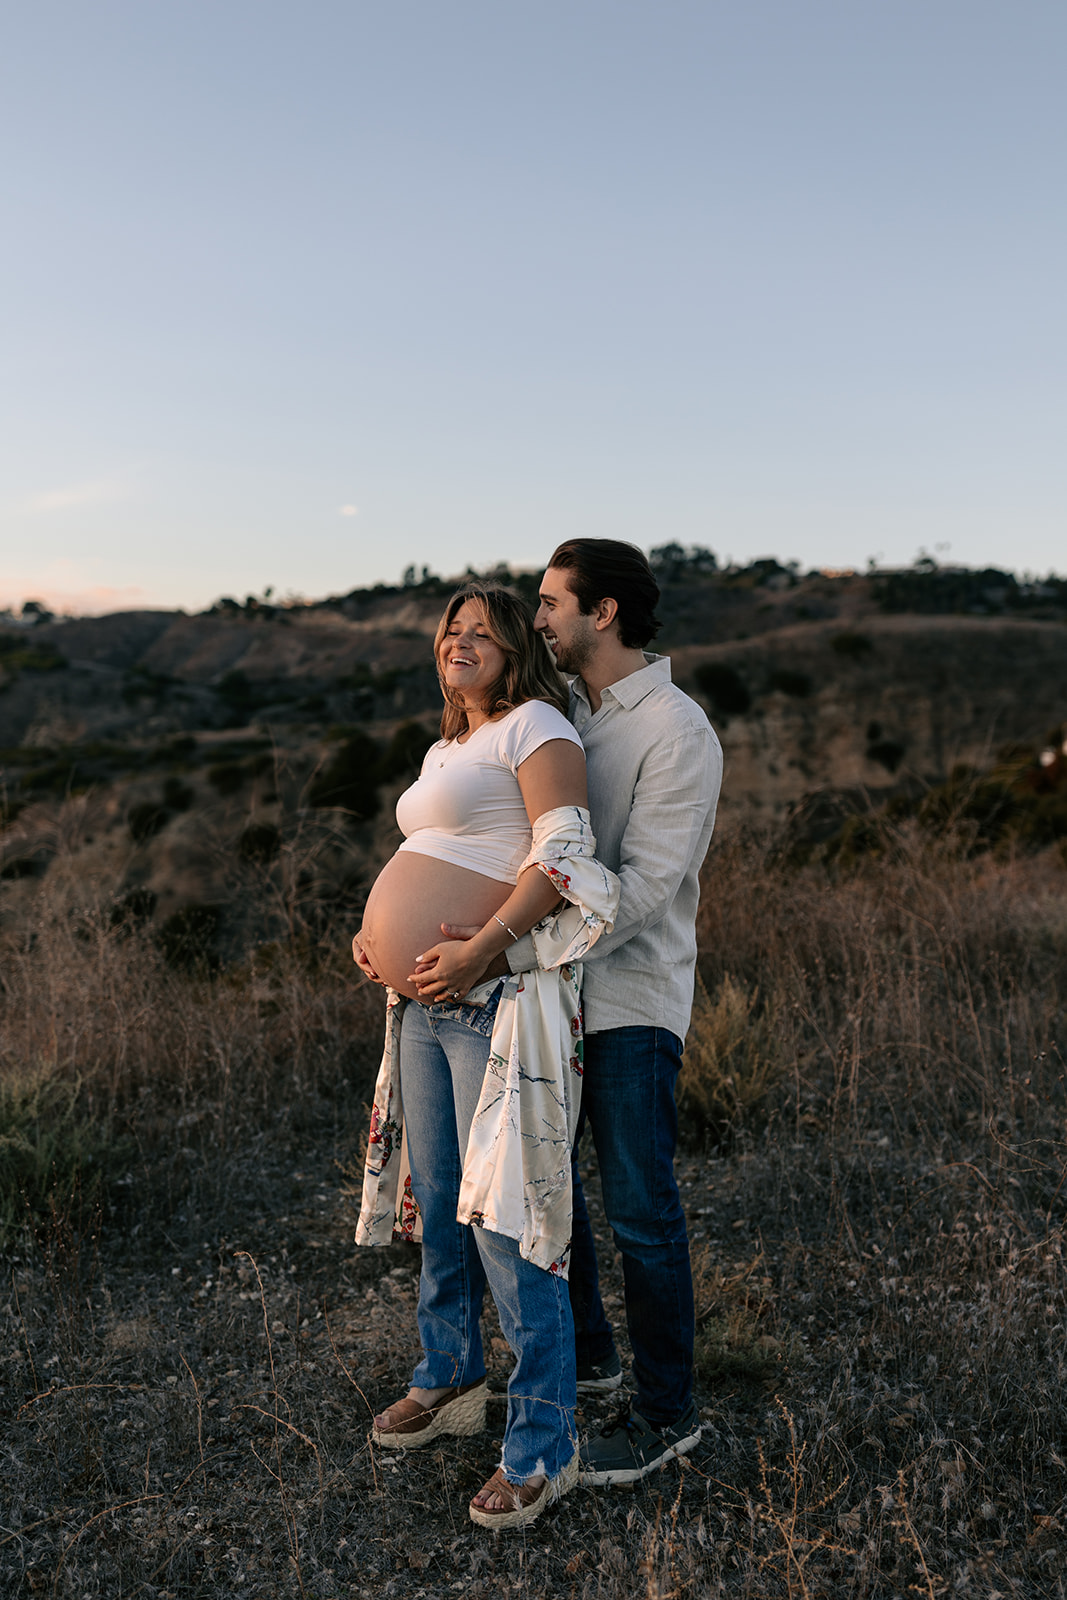 sunset maternity photoshoot rolling hills california couples photoshoot california couples photographer couples poses 